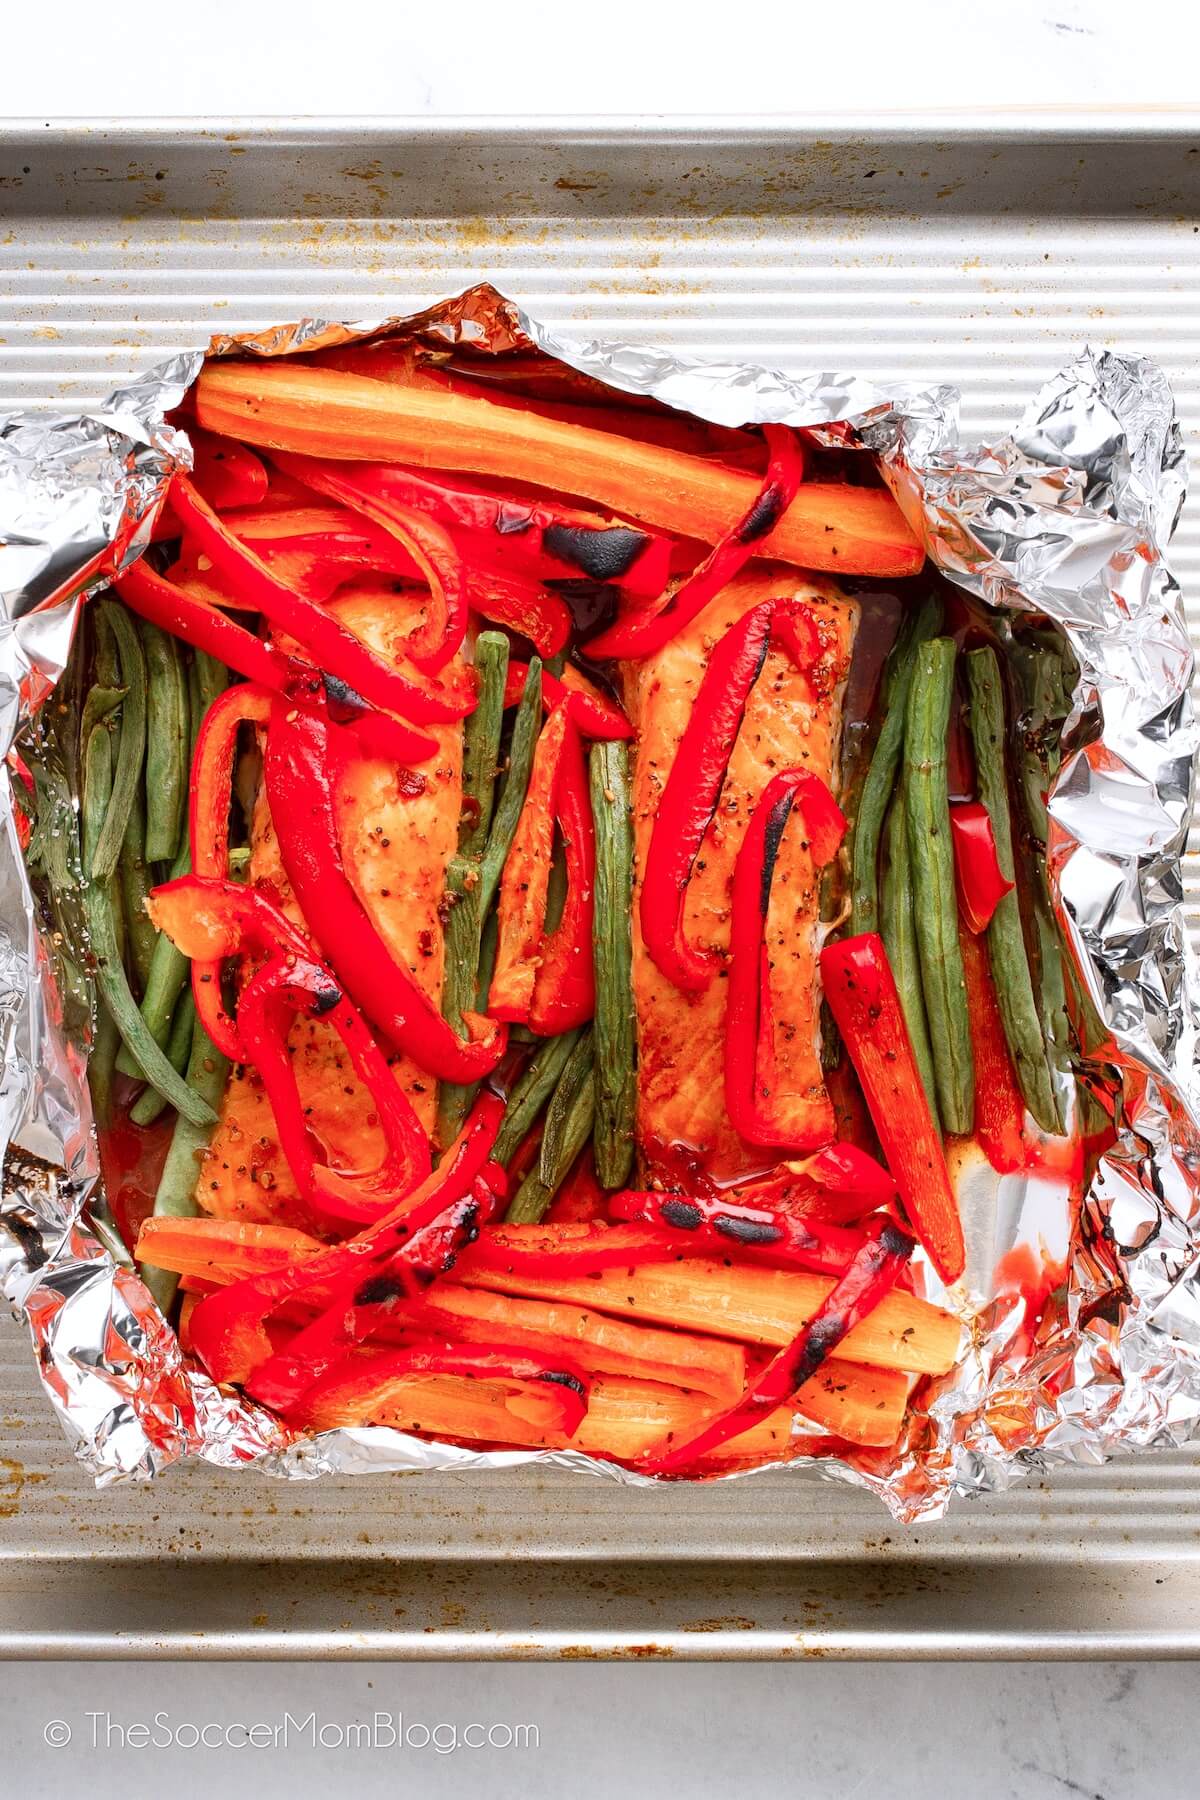 salmon and veggies in an open foil packet